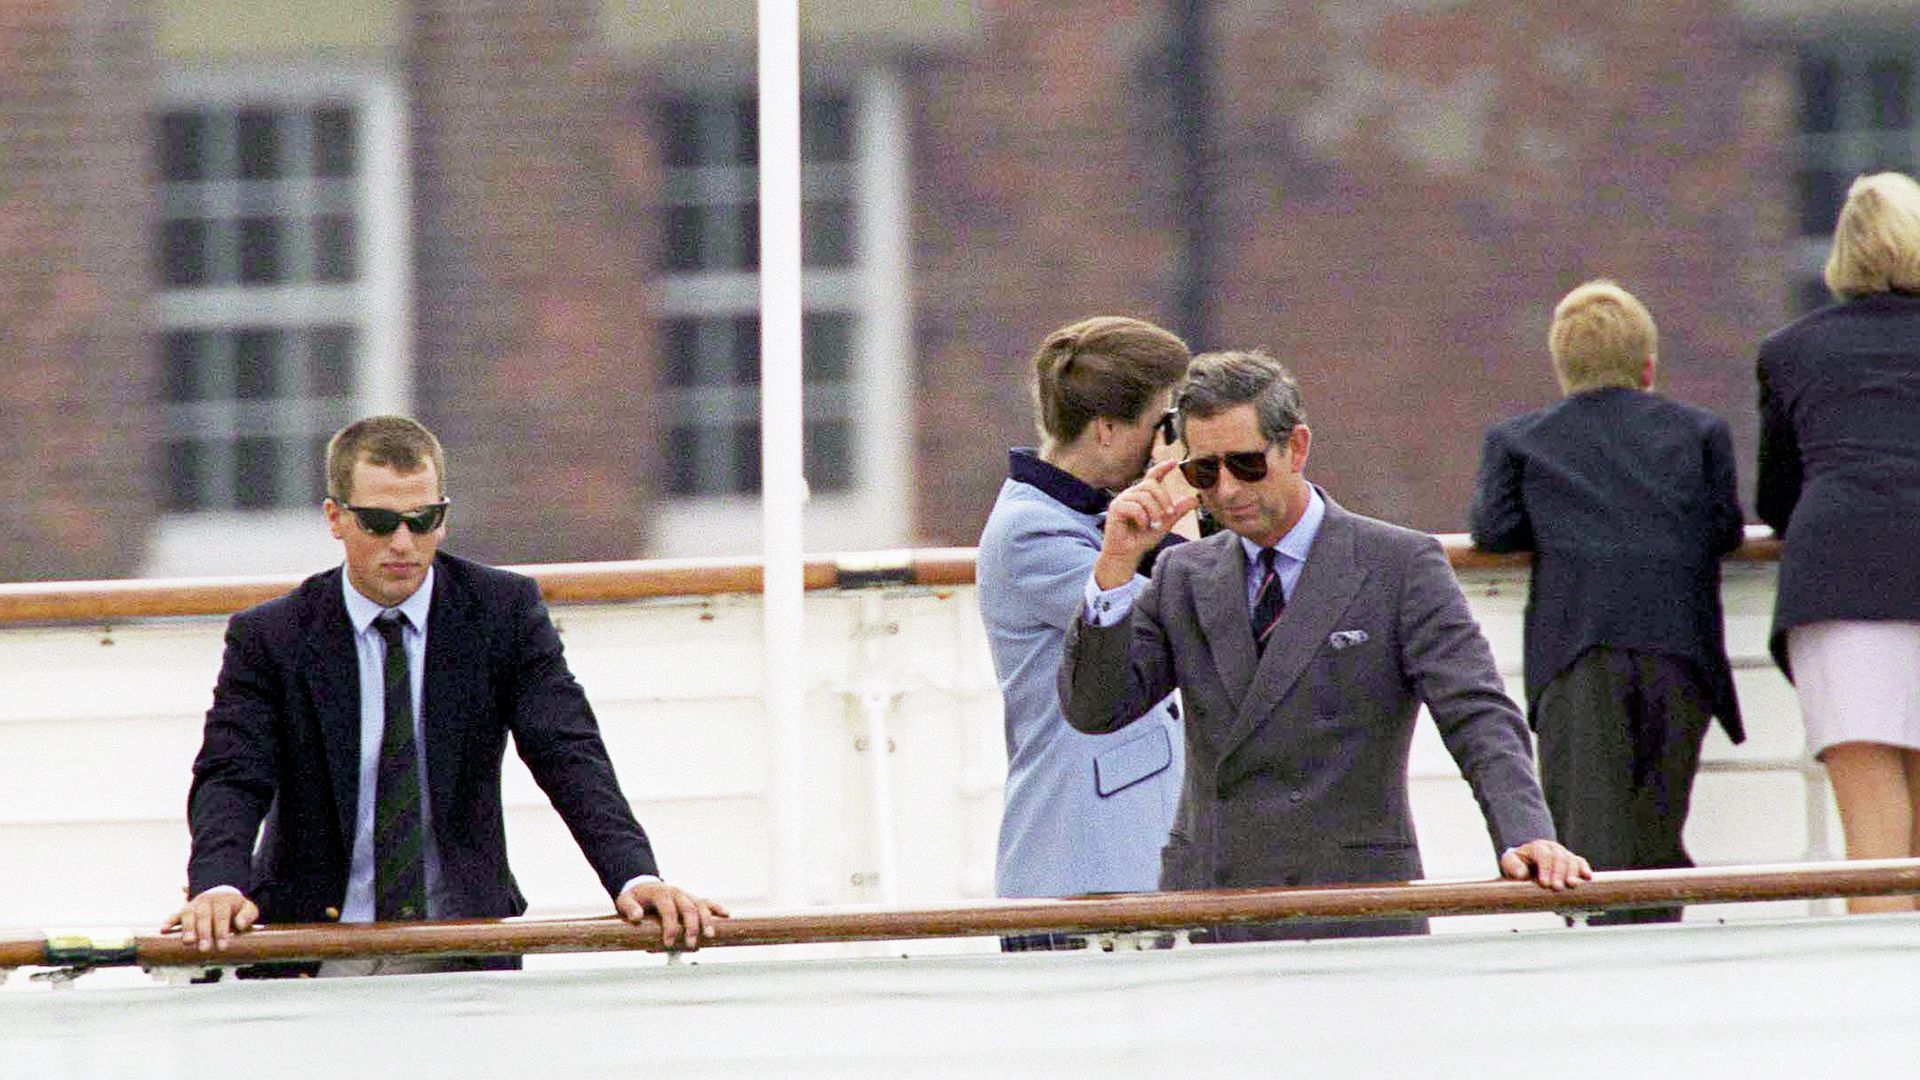 Peter Phillips and Prince Charles wearing sunglasses and suits on board the Royal Yacht Britannia 2007